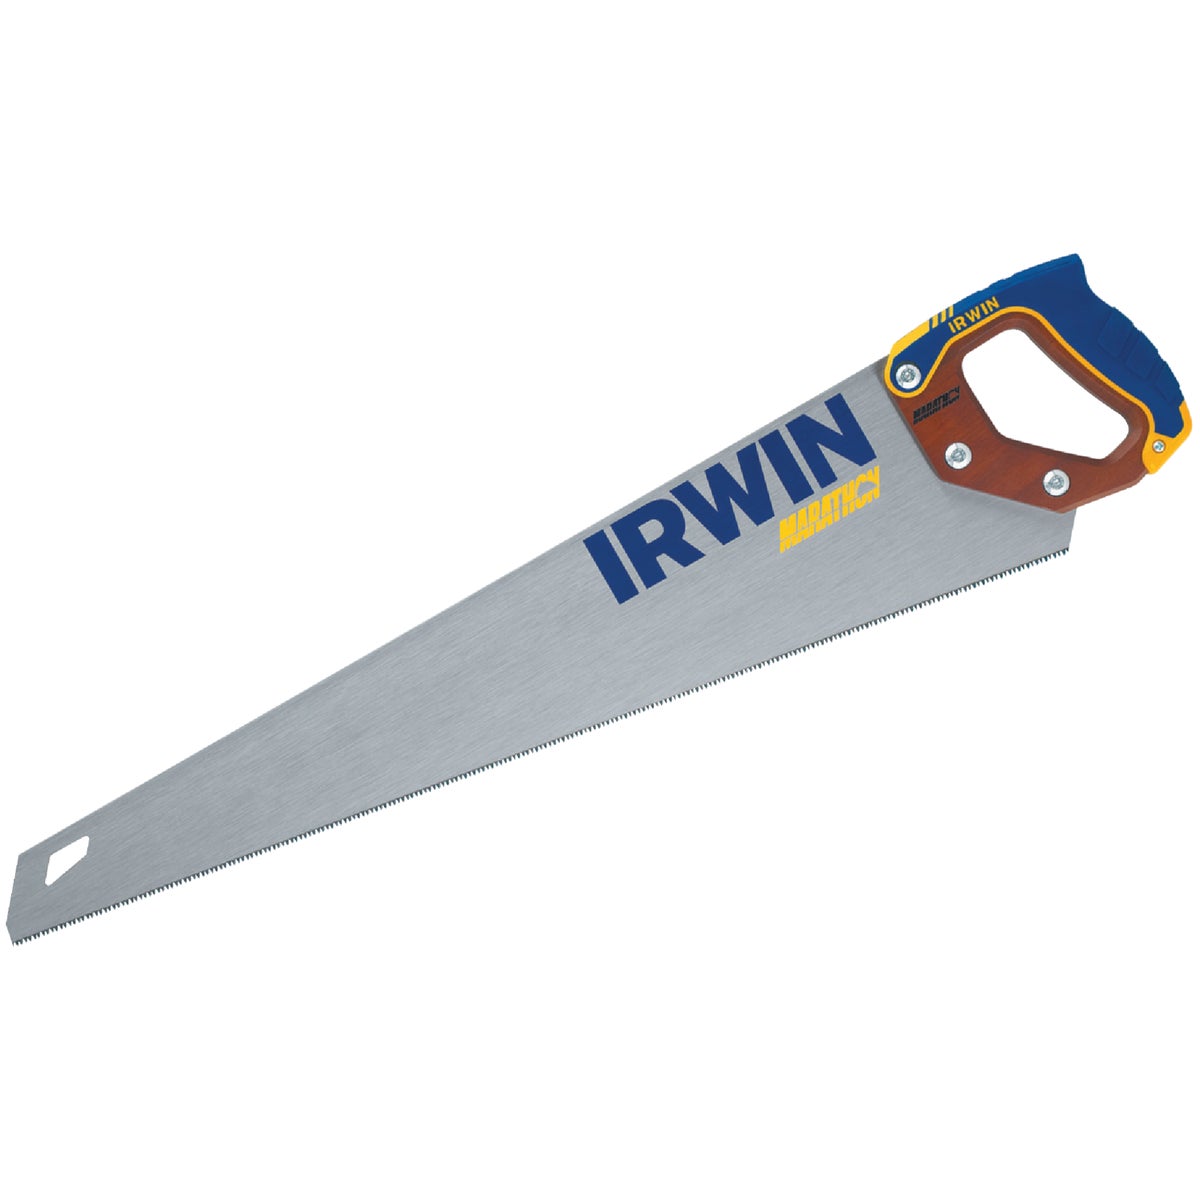 Irwin 24 In. L. Blade 12 PPI Wood, Rubberized Grip Handle Hand Saw